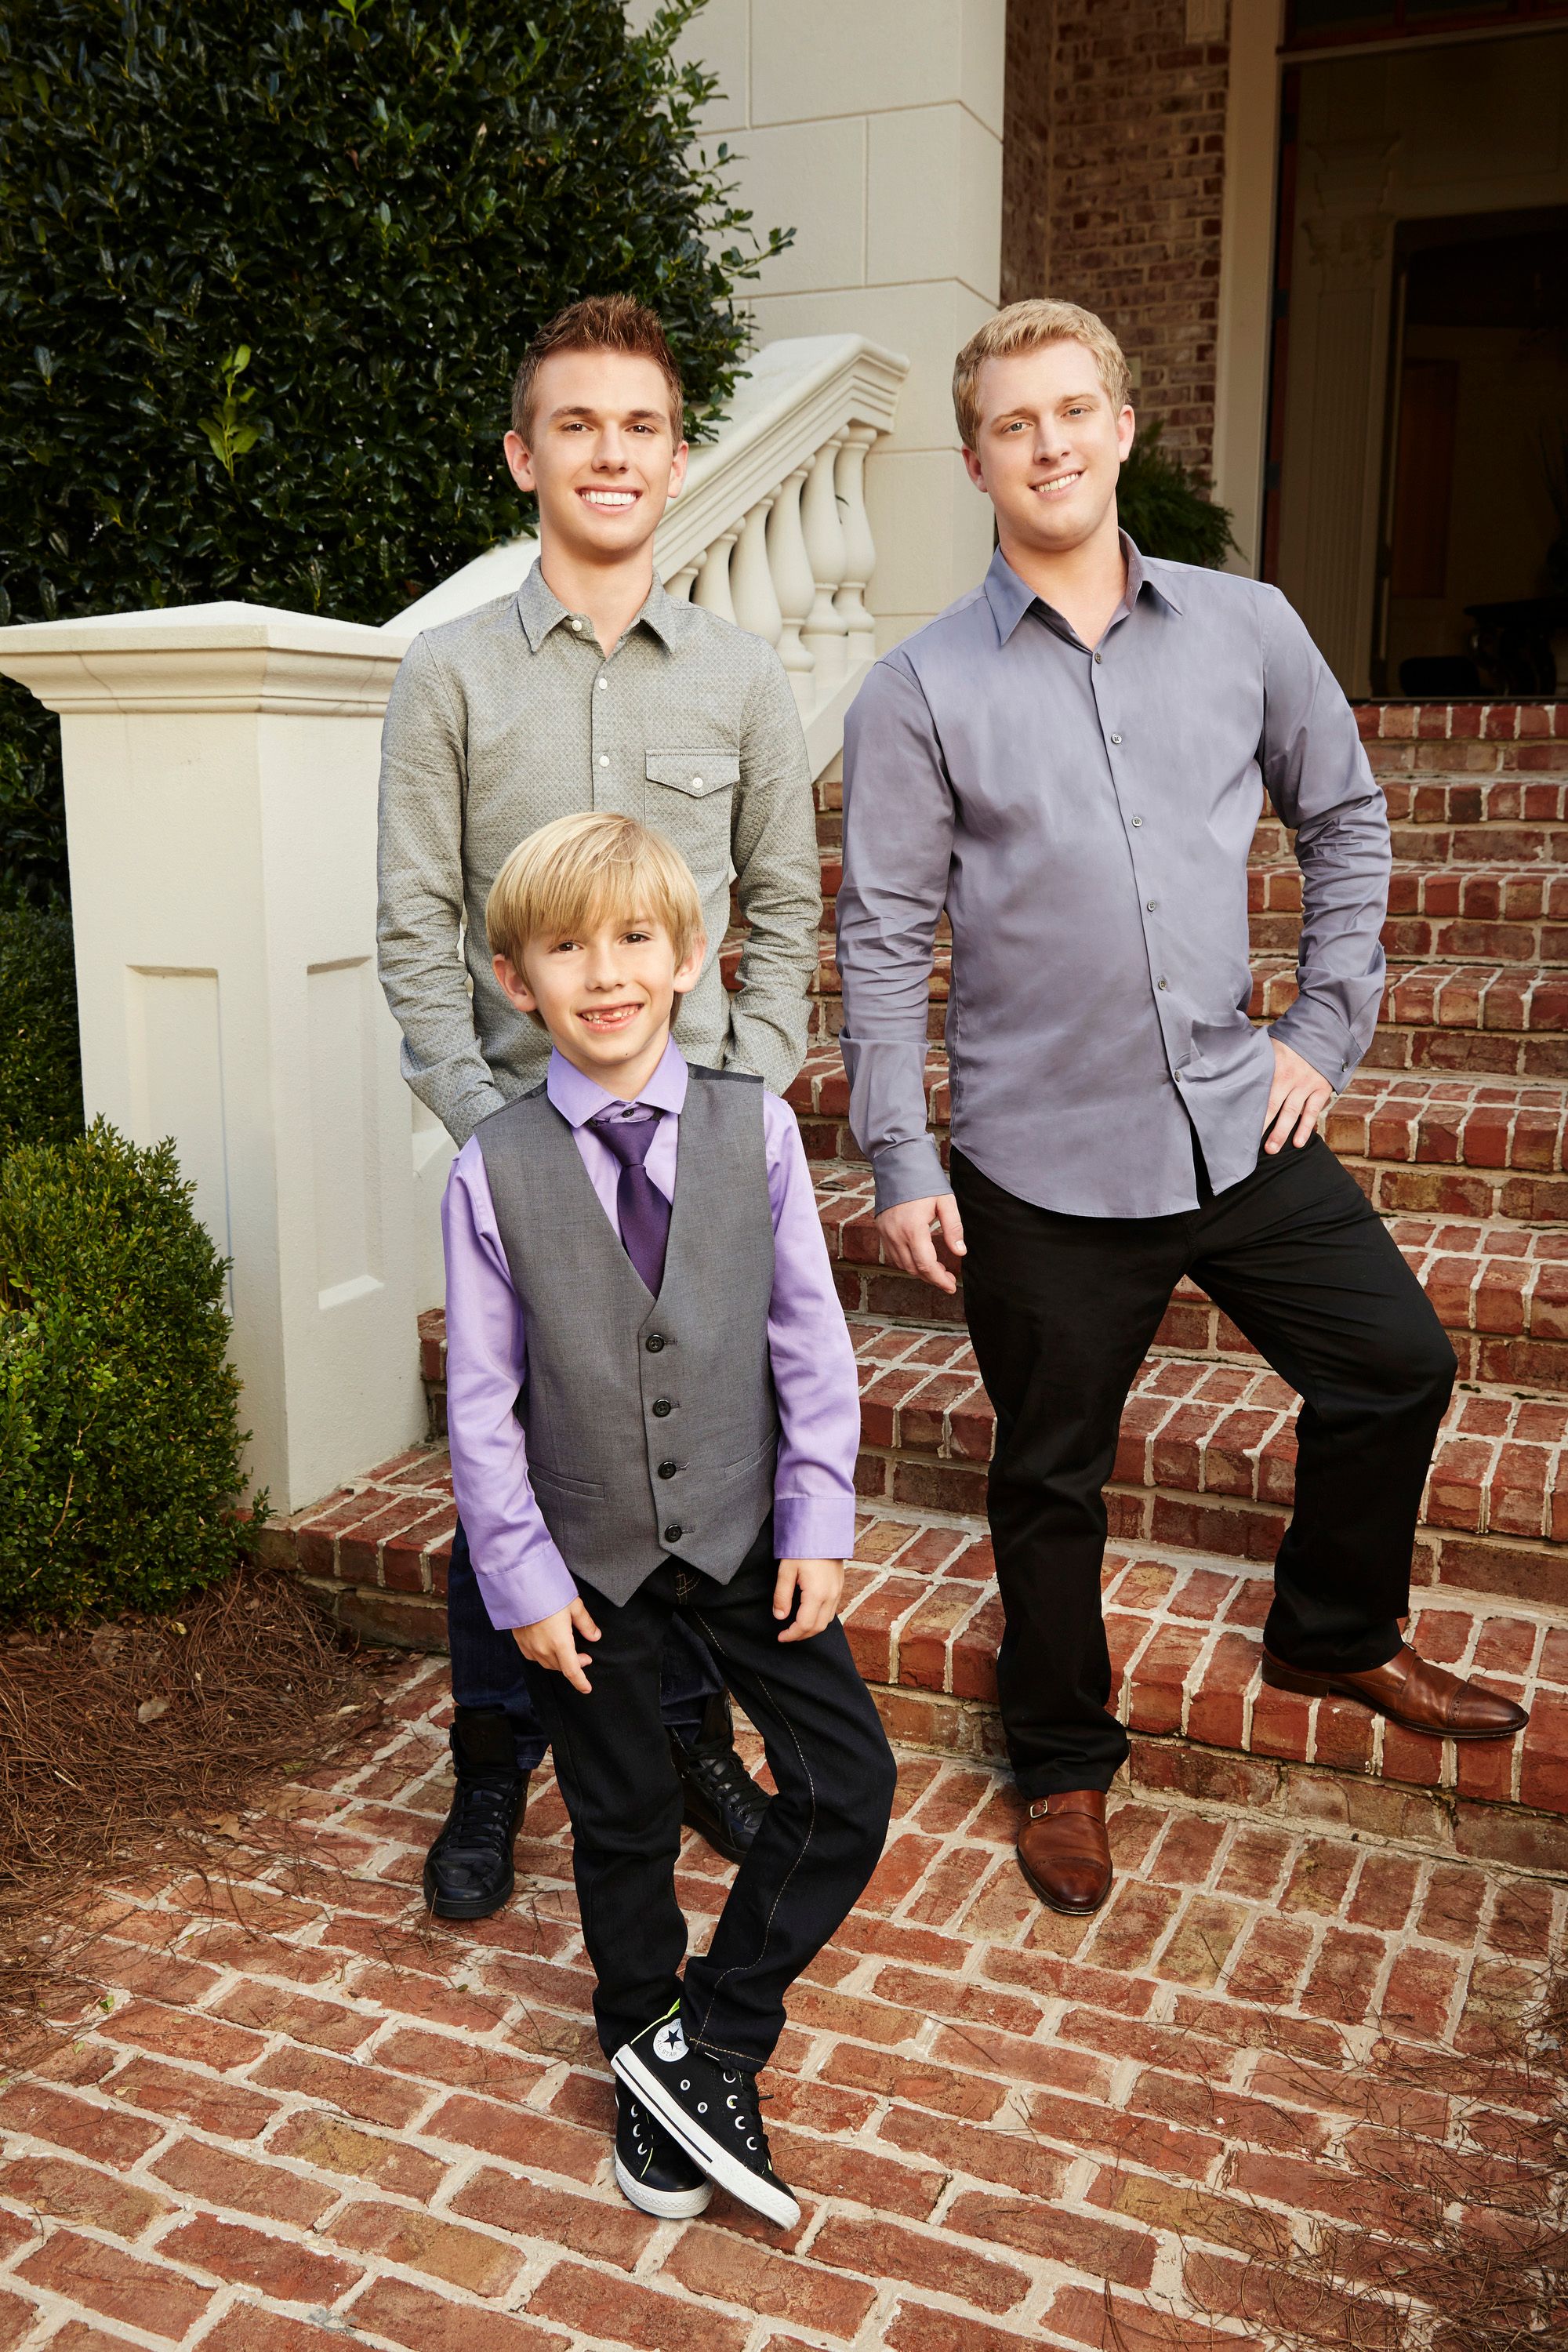 Grayson, Chase, and Kyle Chrisley on season 1 of "Chrisley Knows Best" on October 02, 2013 | Photo: Tommy Garcia/USA Network/NBCU Photo Bank/NBCUniversal/Getty Images